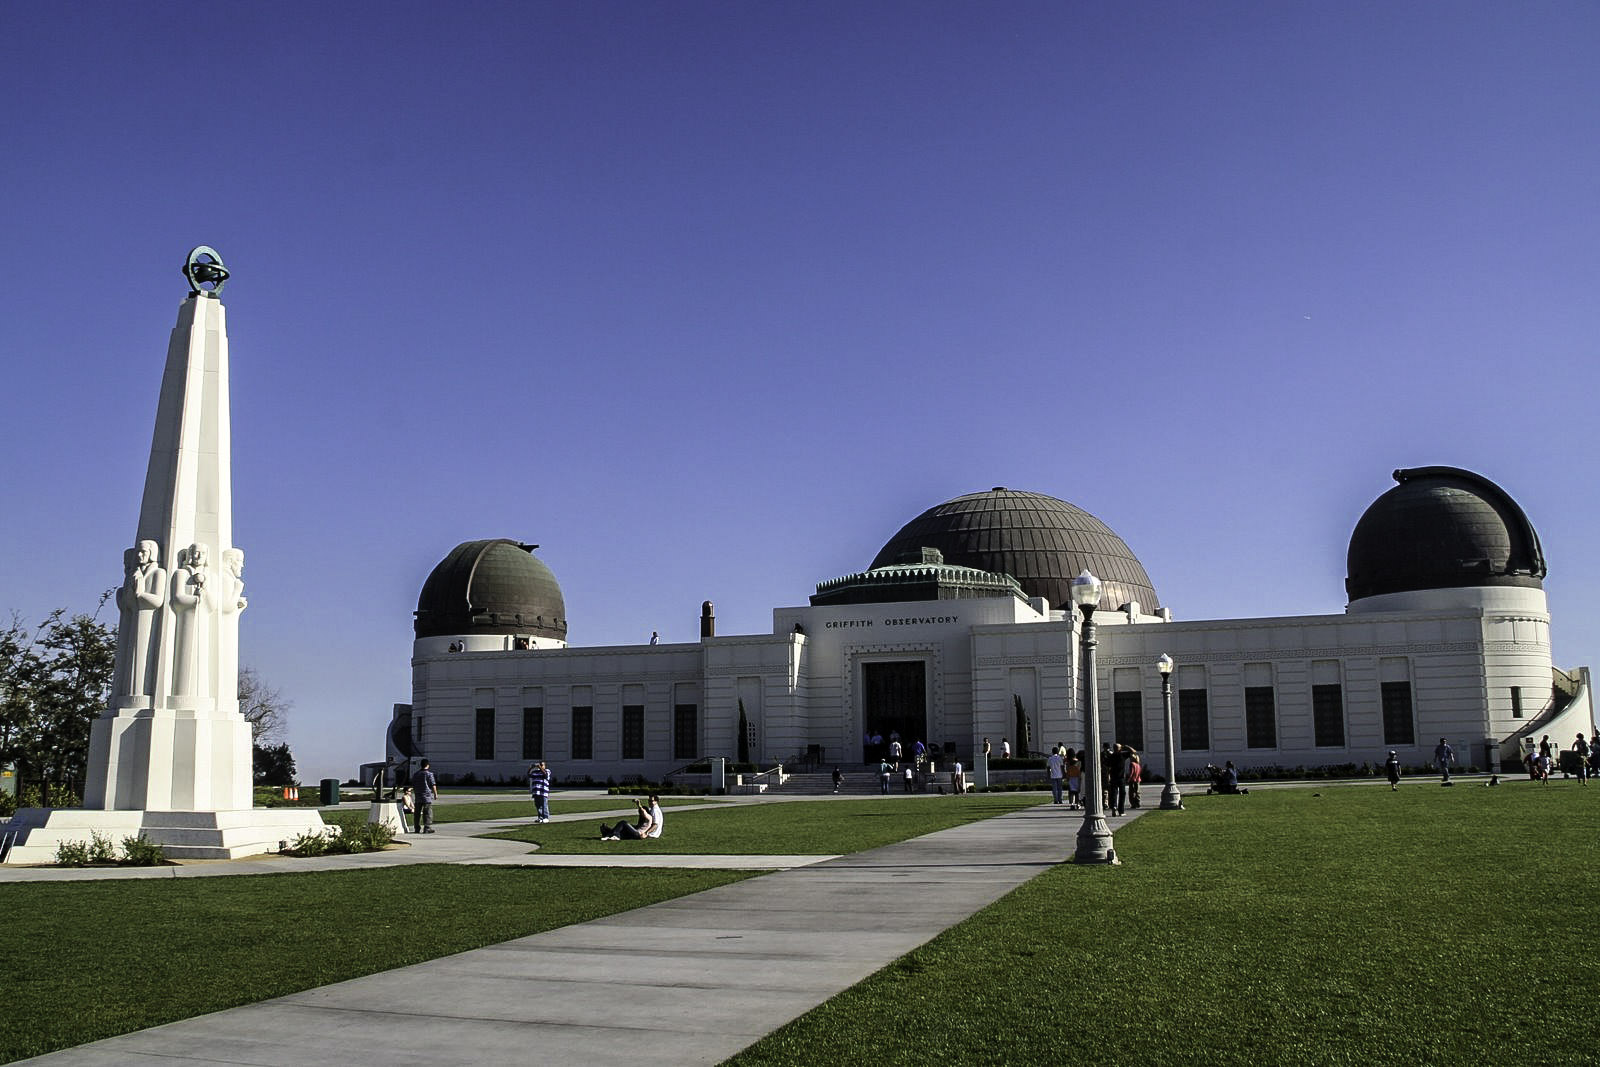 Griffith Observatory in Los Angeles, California image Domain photo